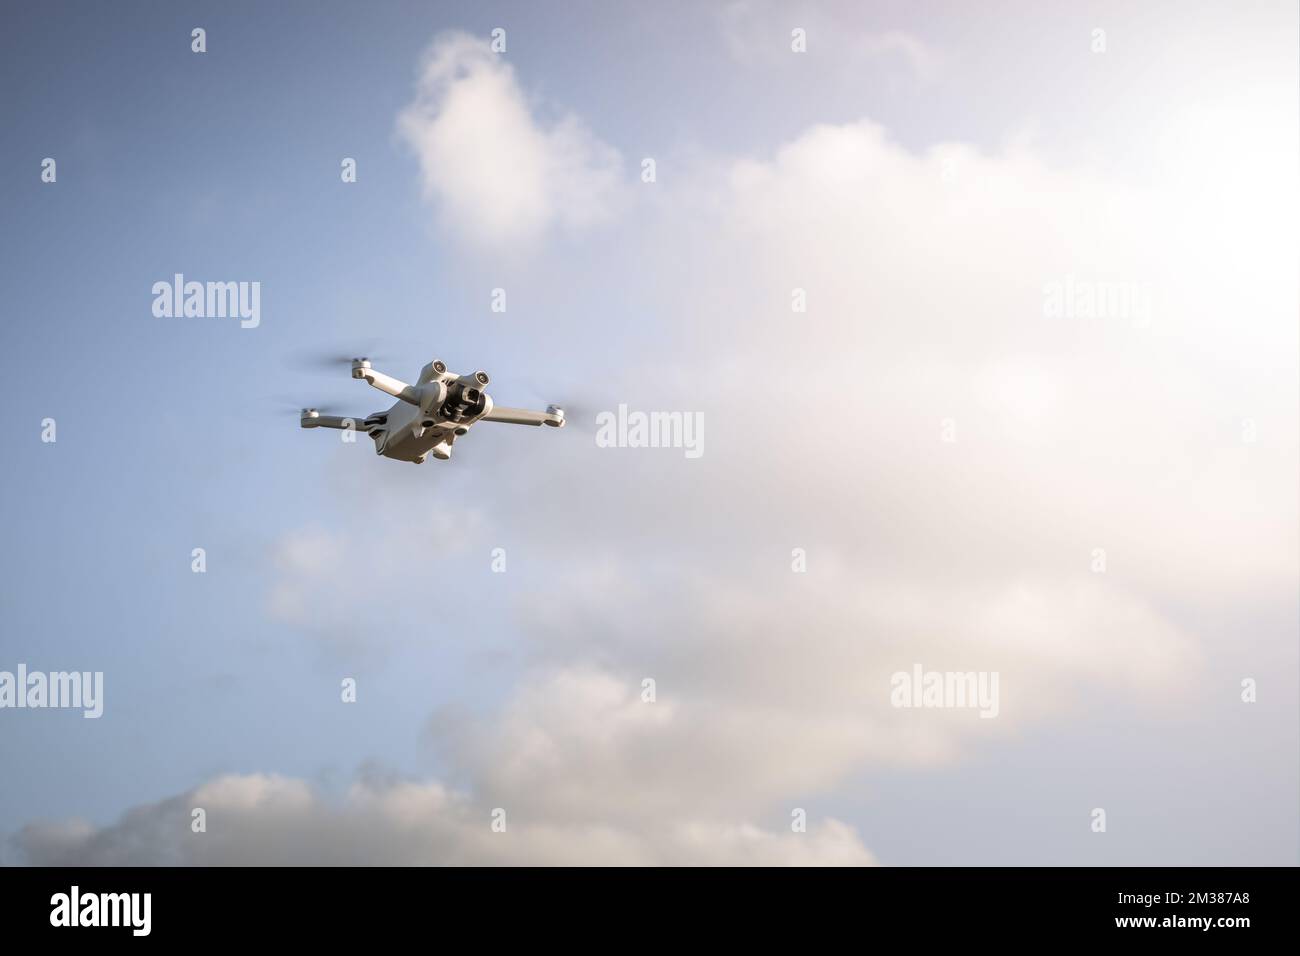 A white quadcopter flying in the sky on a sunny day Stock Photo